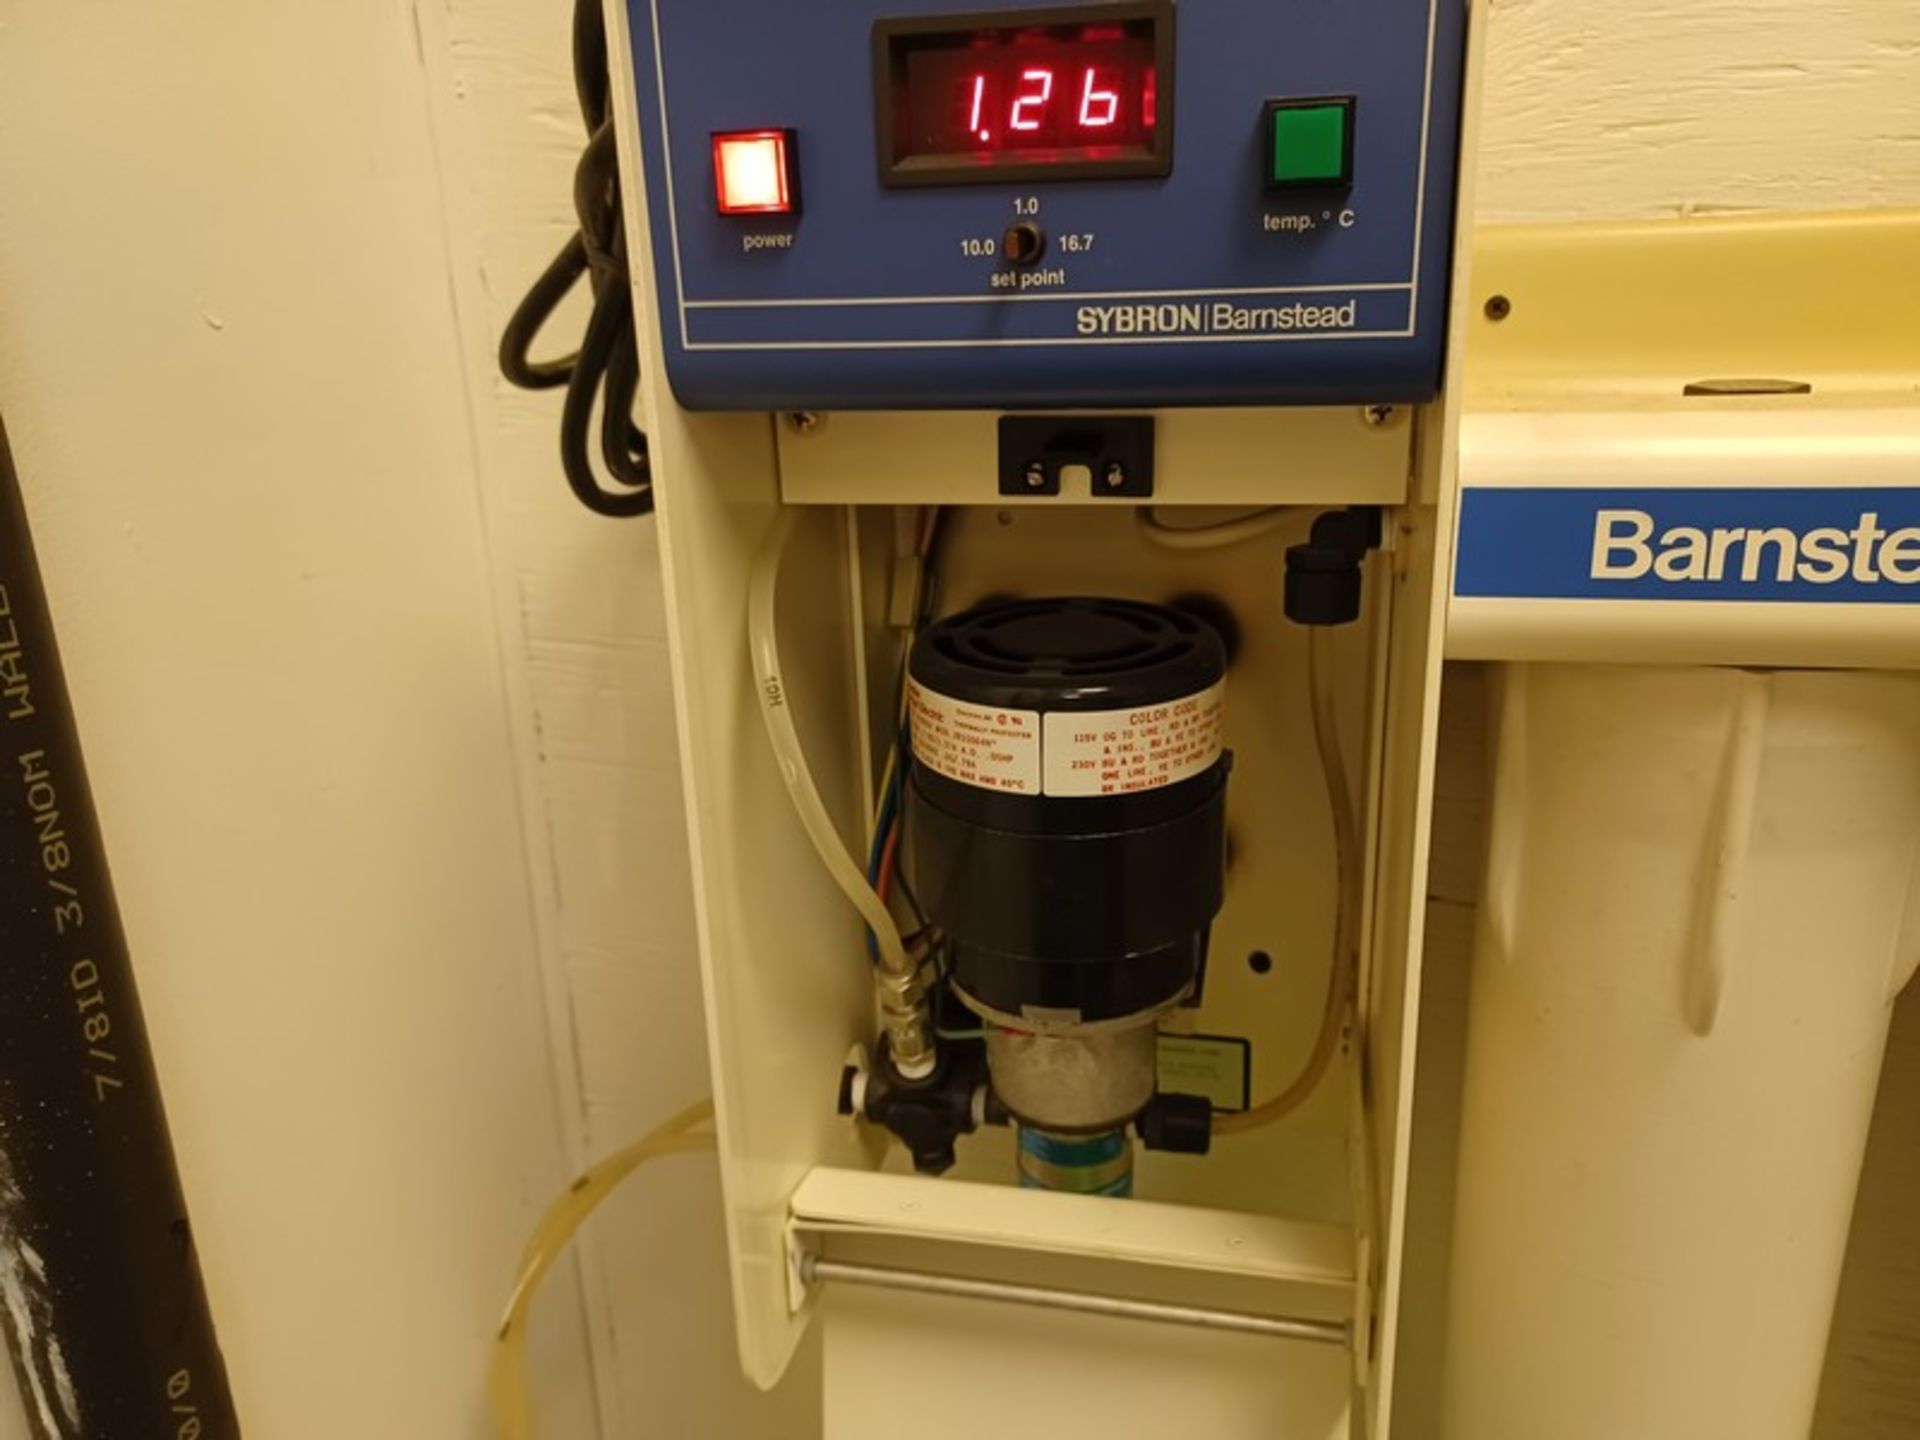 SYBRON / Barnsted NanoPure II Water Purification System (Located New Brunswick, NJ) - Image 3 of 4